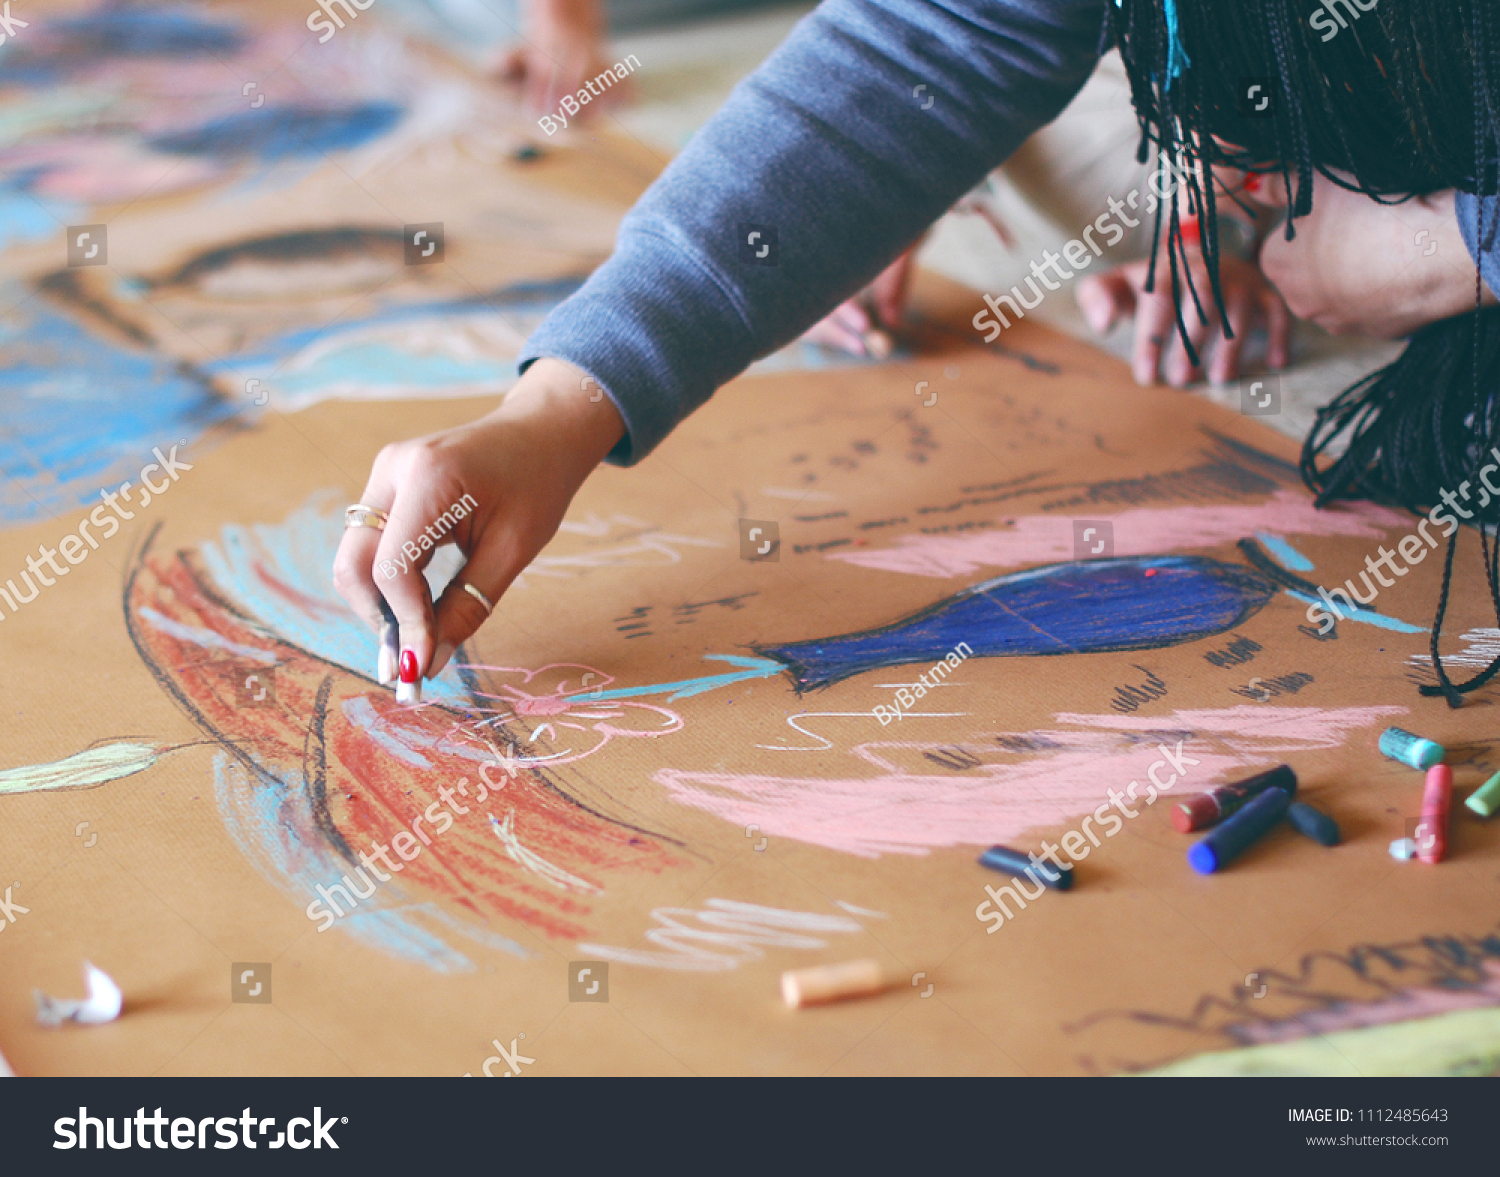 woman is painting with a chalk picture in an art studio on the floor #1112485643